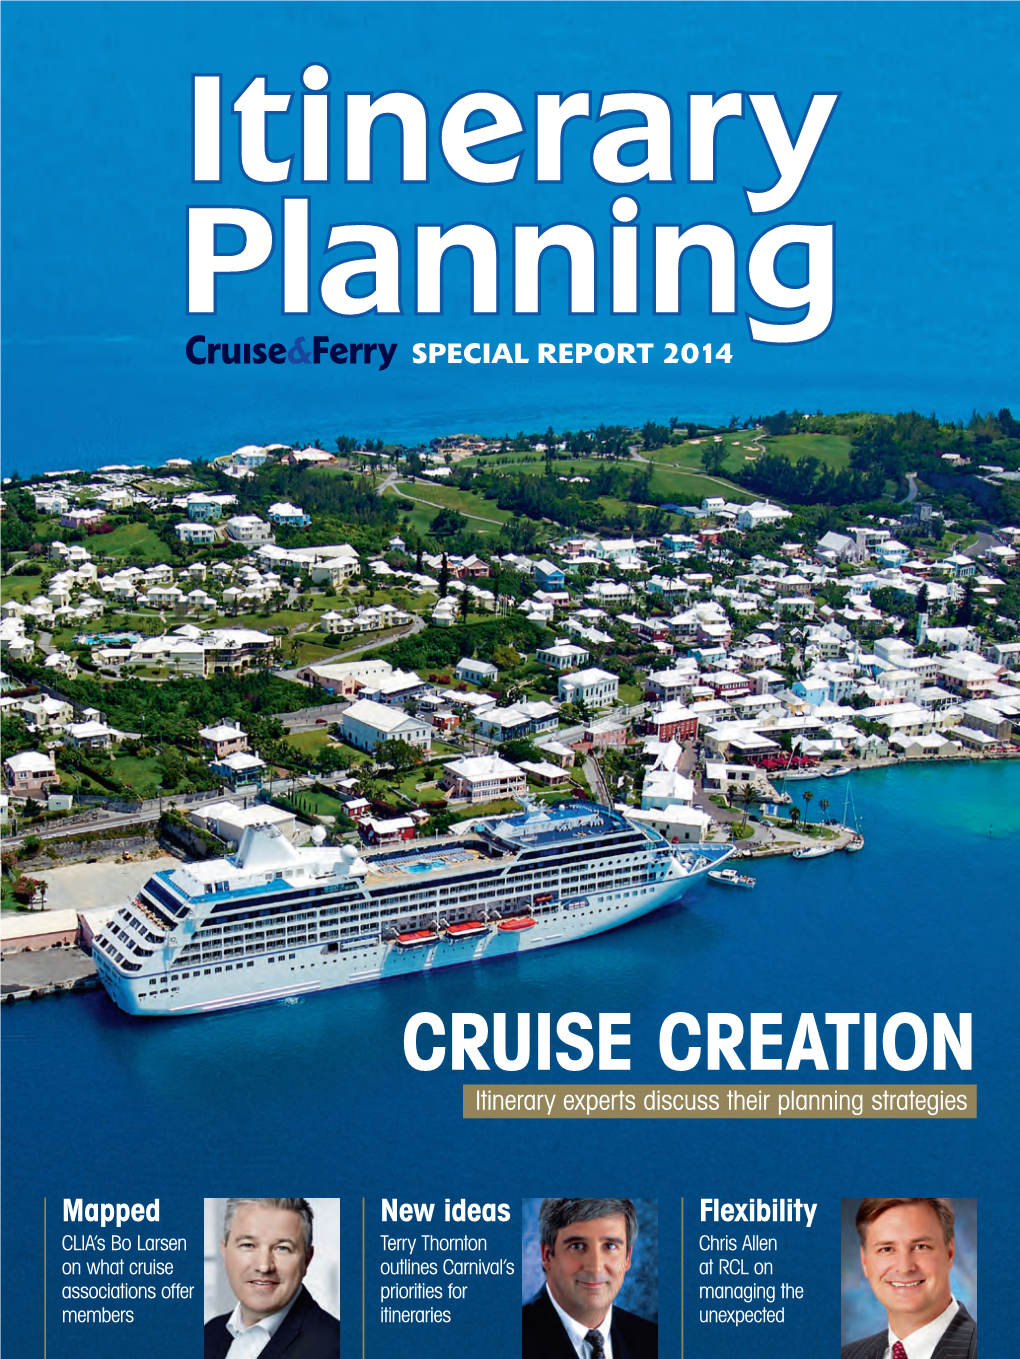 CRUISE CREATION Itinerary Experts Discuss Their Planning Strategies